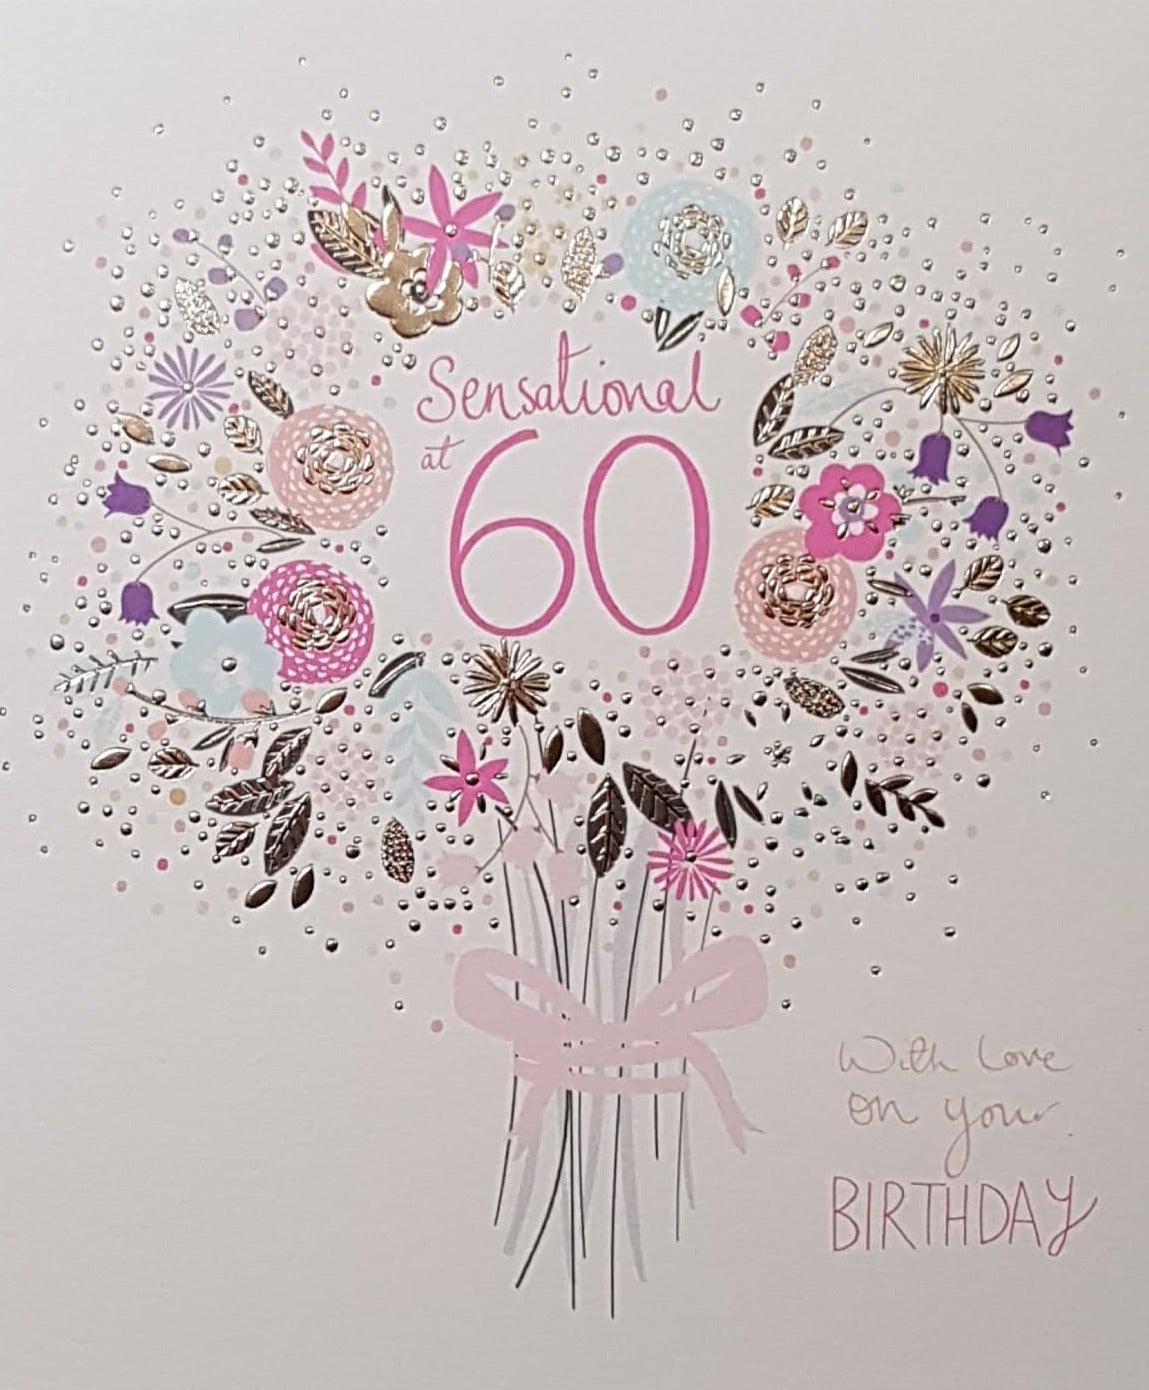 Age 60 Birthday Card - A Pink Font Inside A Circle Of Flowers In A Bouquet